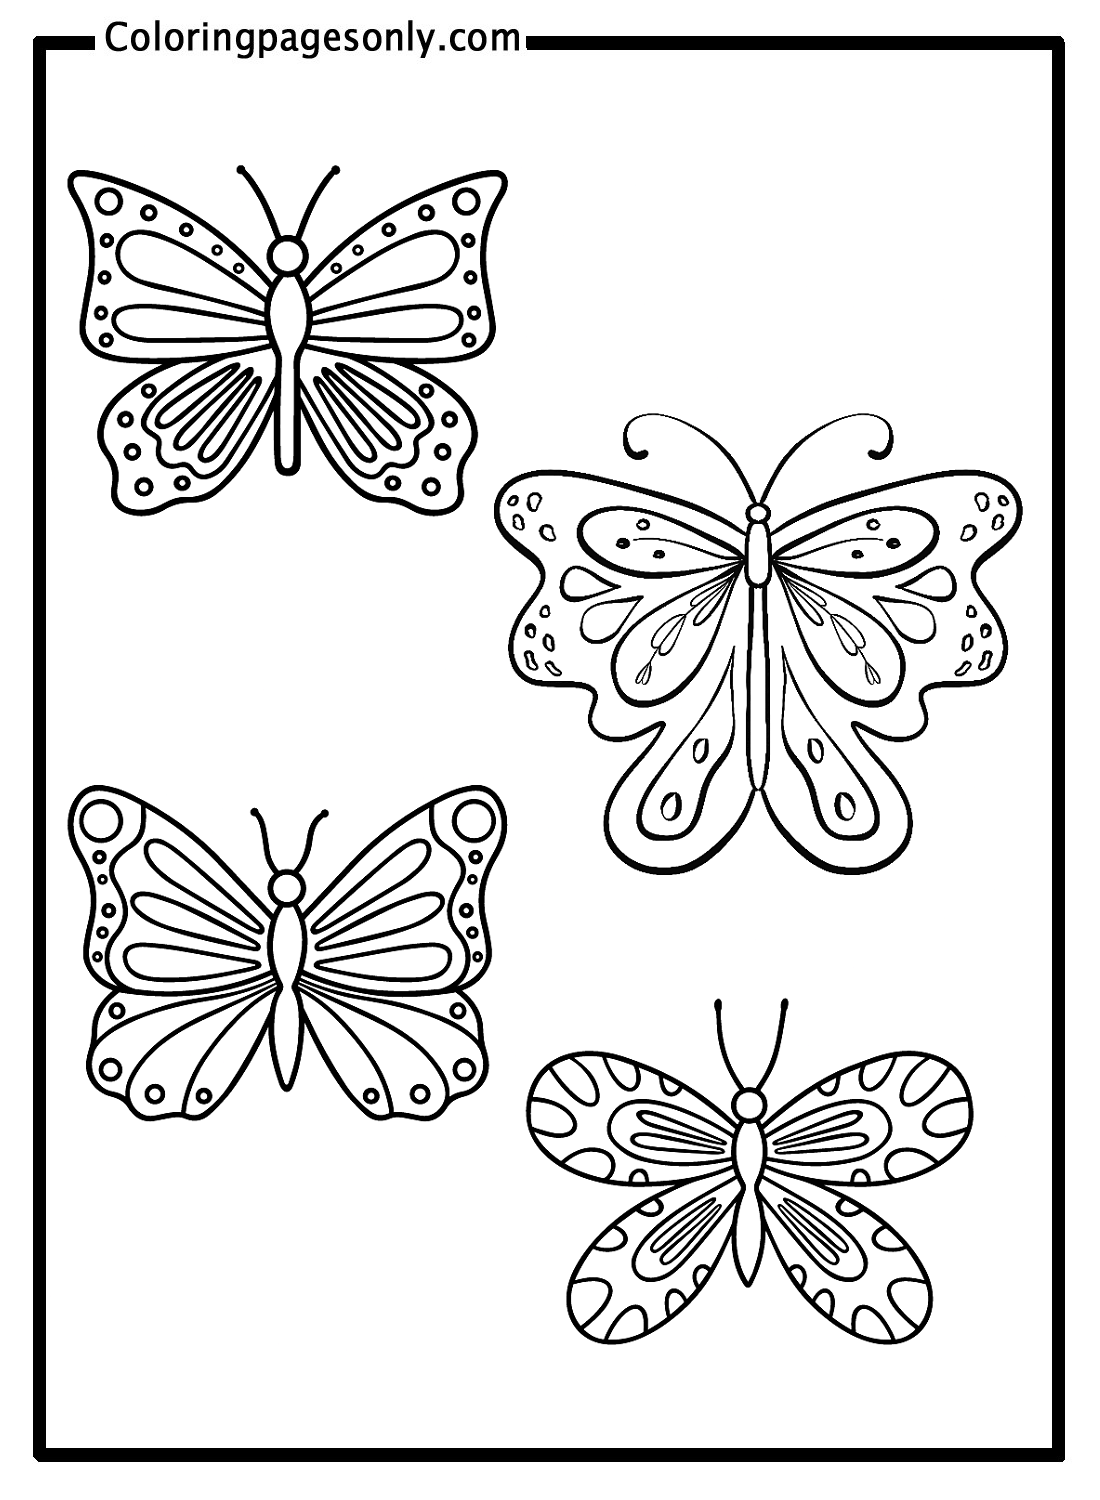 Four Butterflies Coloring Page - Free Printable Coloring Pages